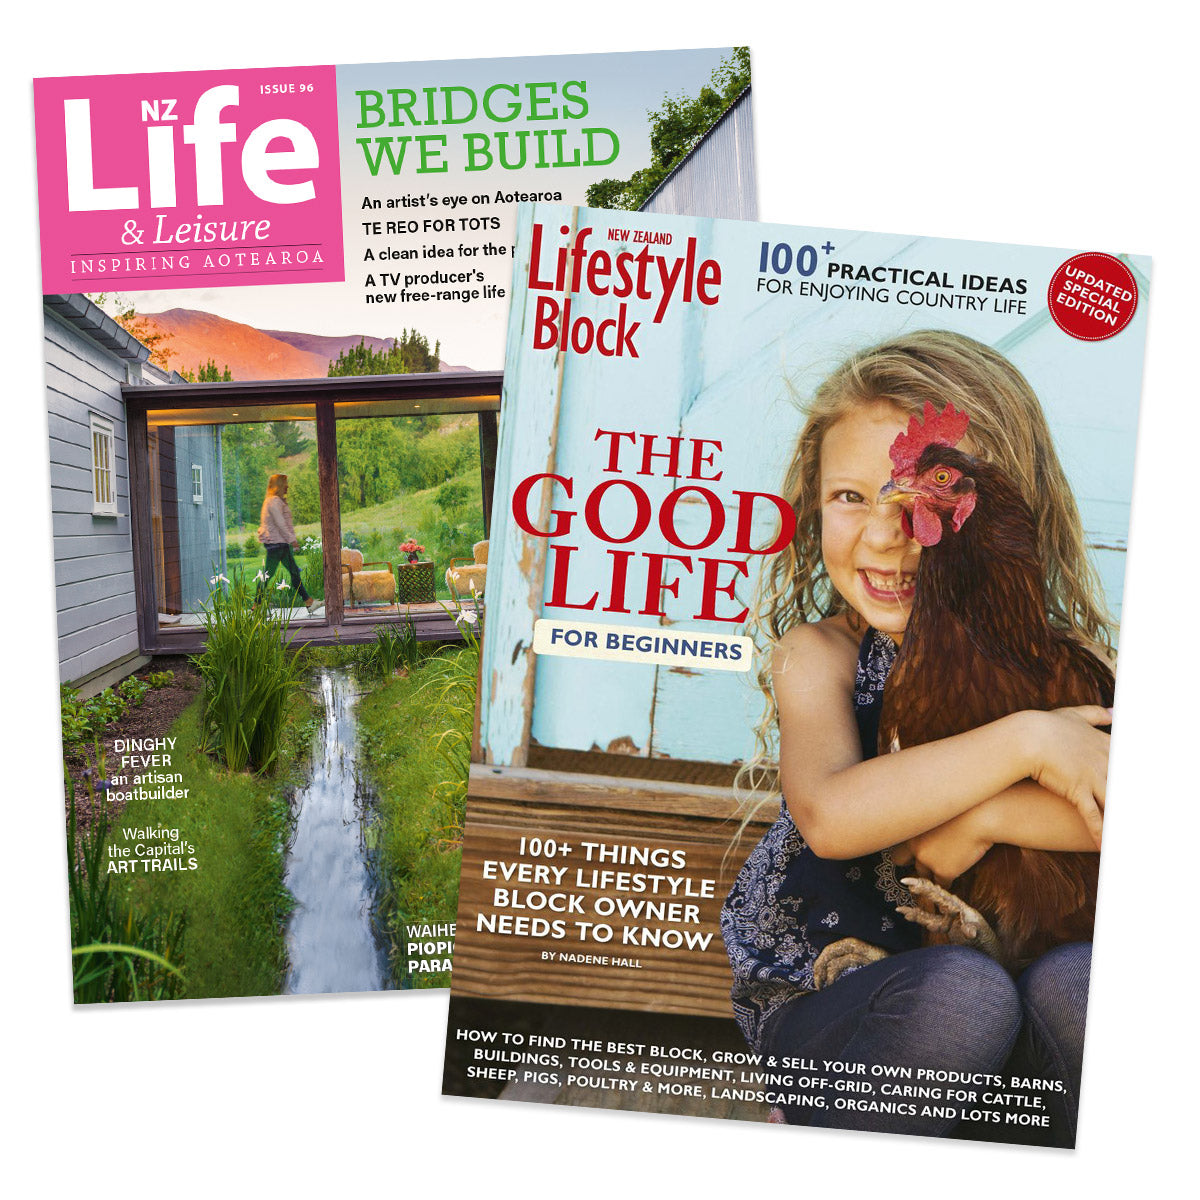 1 Year of NZ Life & Leisure plus The Good Life for Beginners